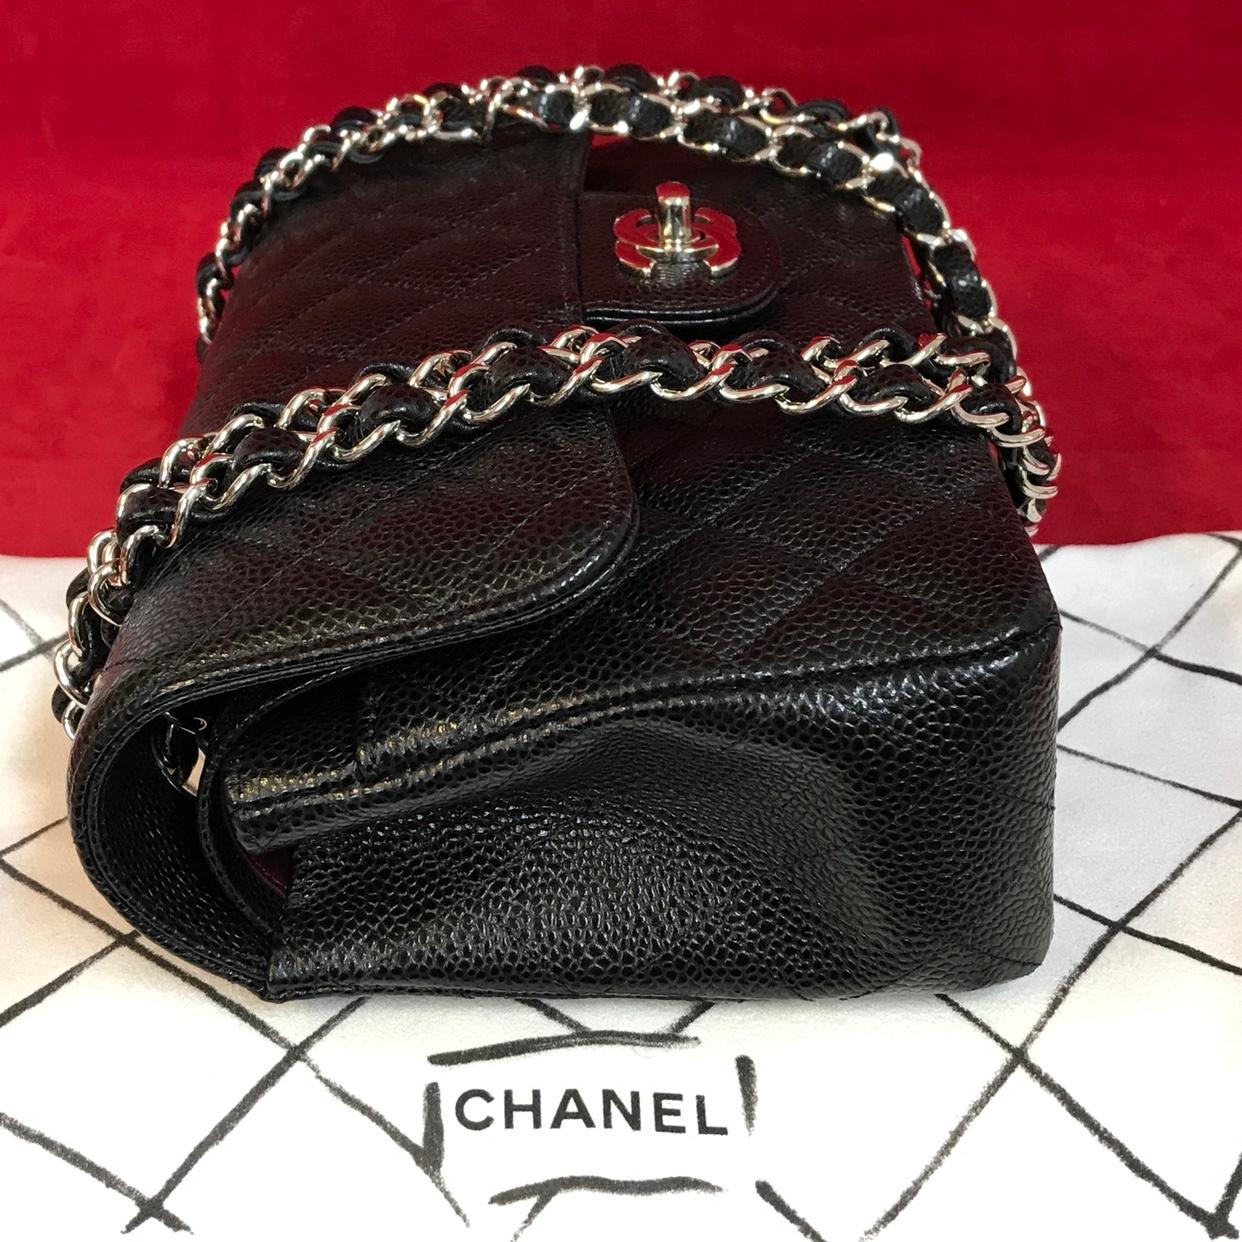 CHANEL A01113 classic double flap bag small shoulder bag quilted caviar 2018 In Excellent Condition For Sale In Berlin, DE